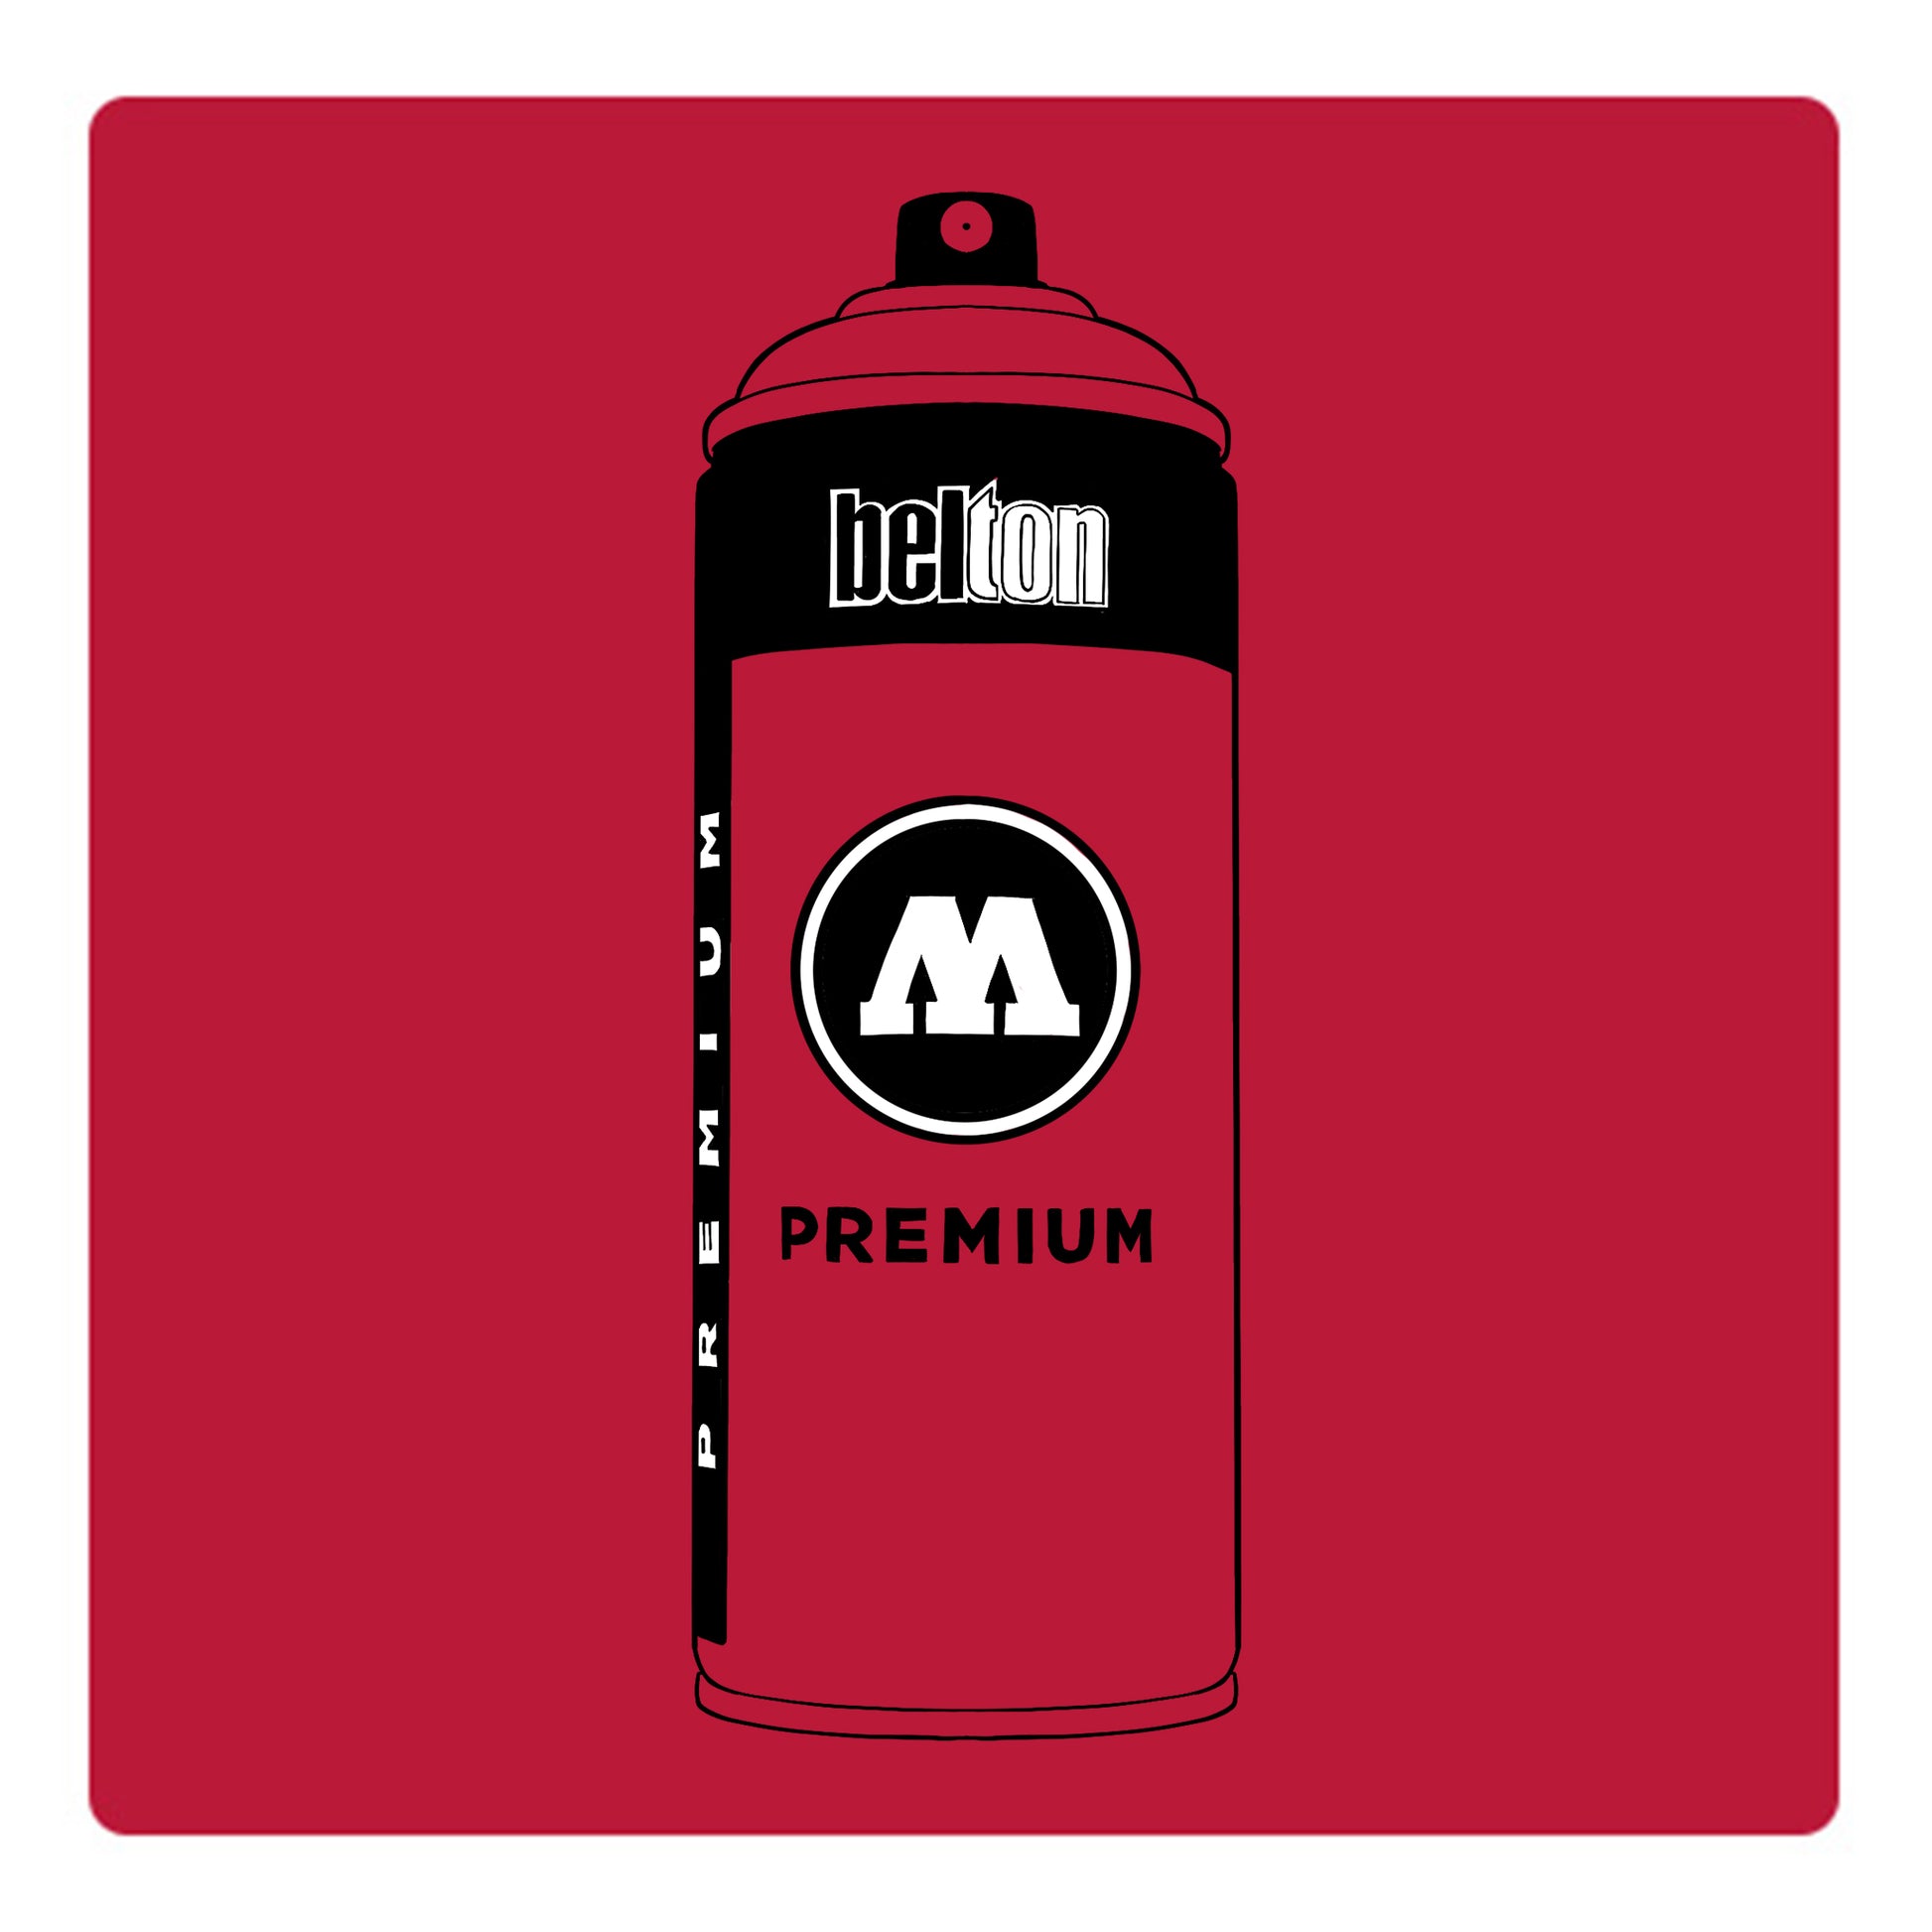 A black outline drawing of a rouge red spray paint can with the words "belton","premium" and the letter"M" written on the face in black and white font. The background is a color swatch of the same rouge red with a white border.